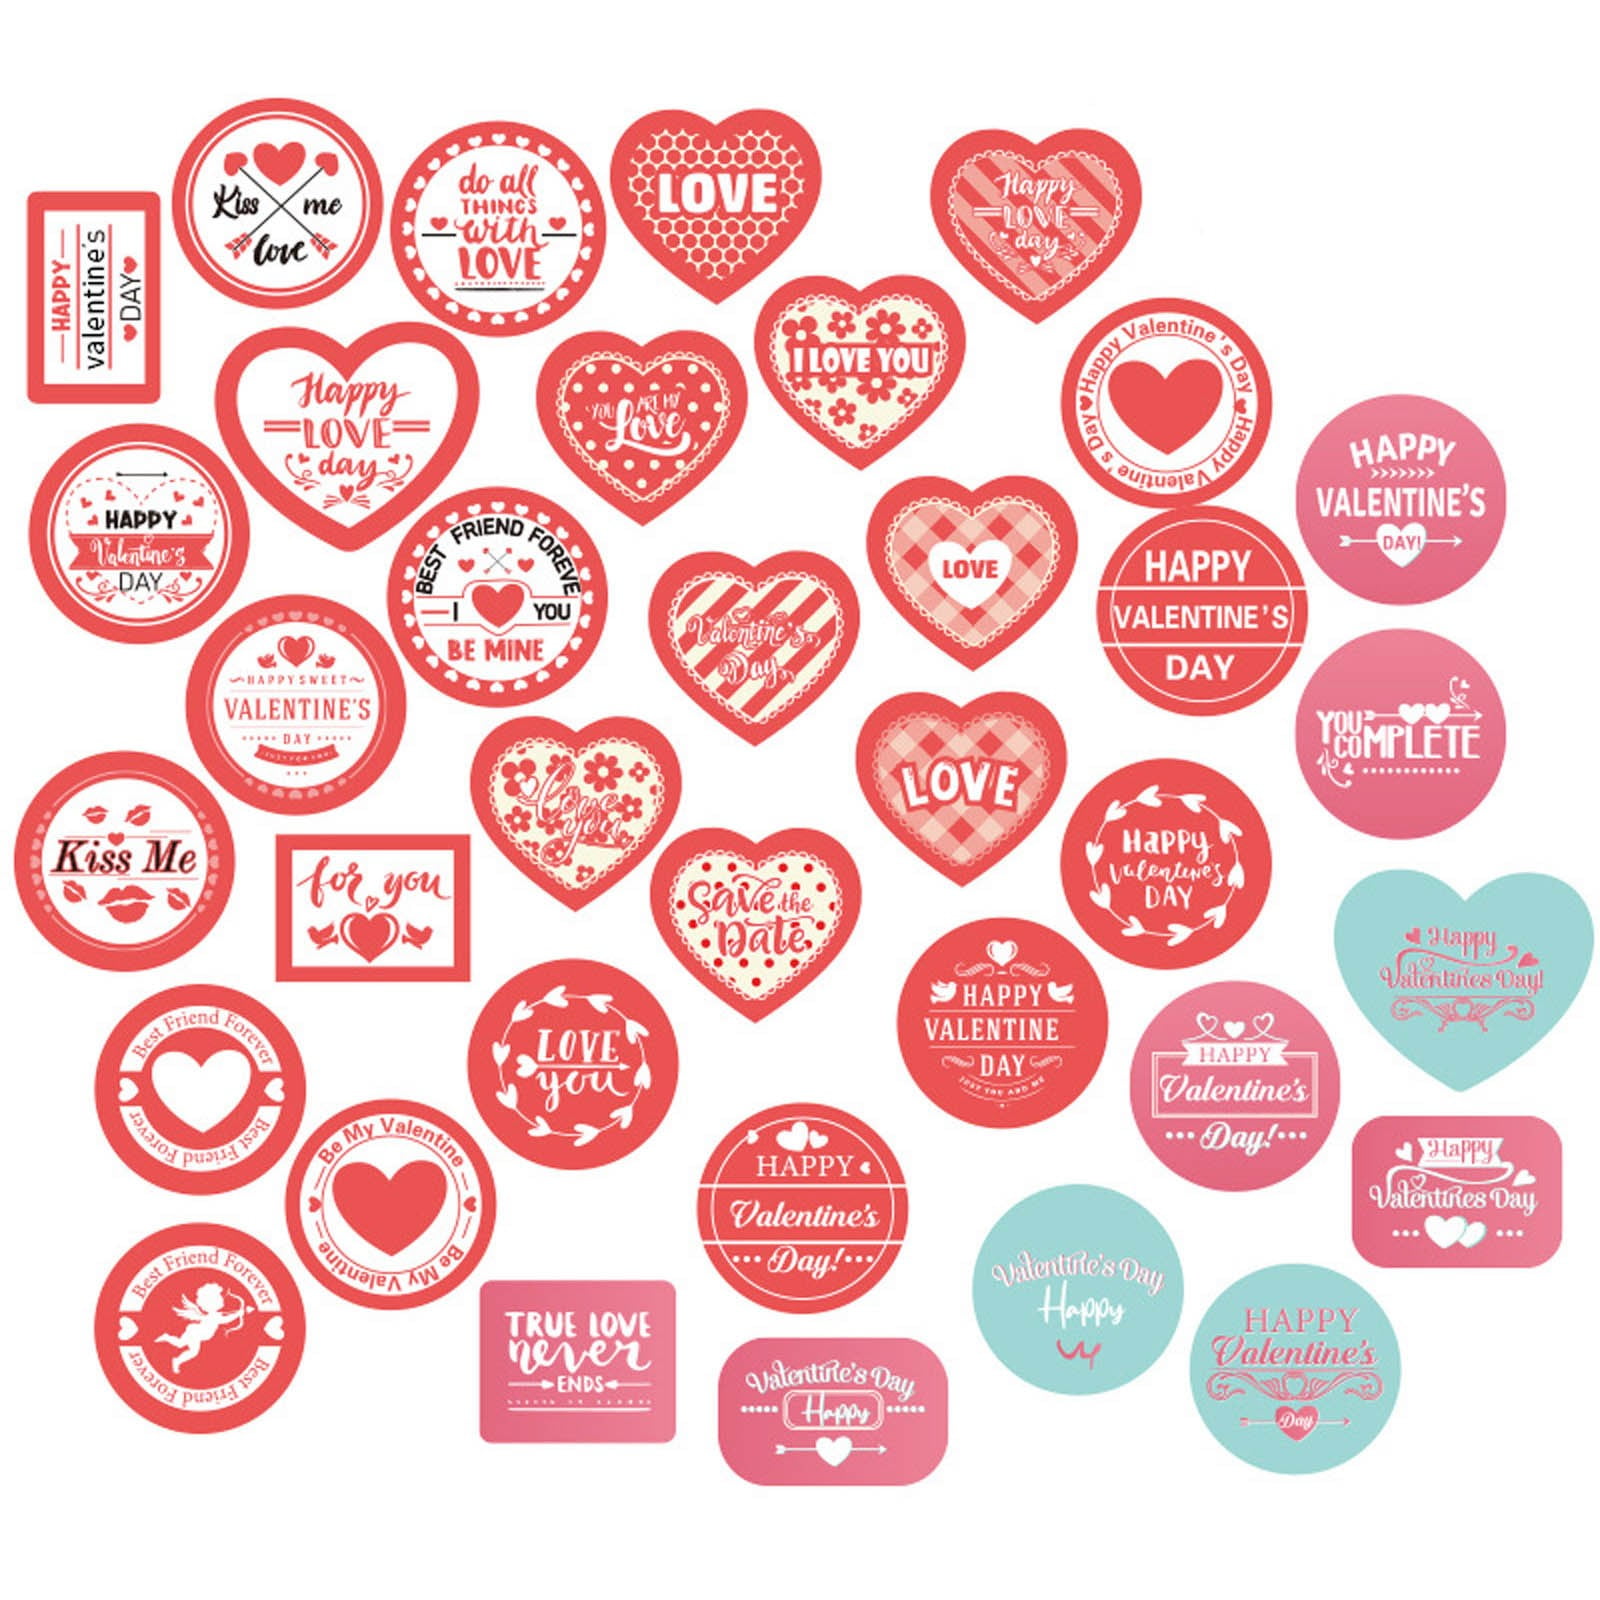 Tarmeek Valentine's Day Heart-shaped Stickers Gift Packaging Decoration  Sticker Gift Box Stickers Wedding Proposal Engagement Anniversary Birthday  Party Favors Valentine's Day Gifts for Women 